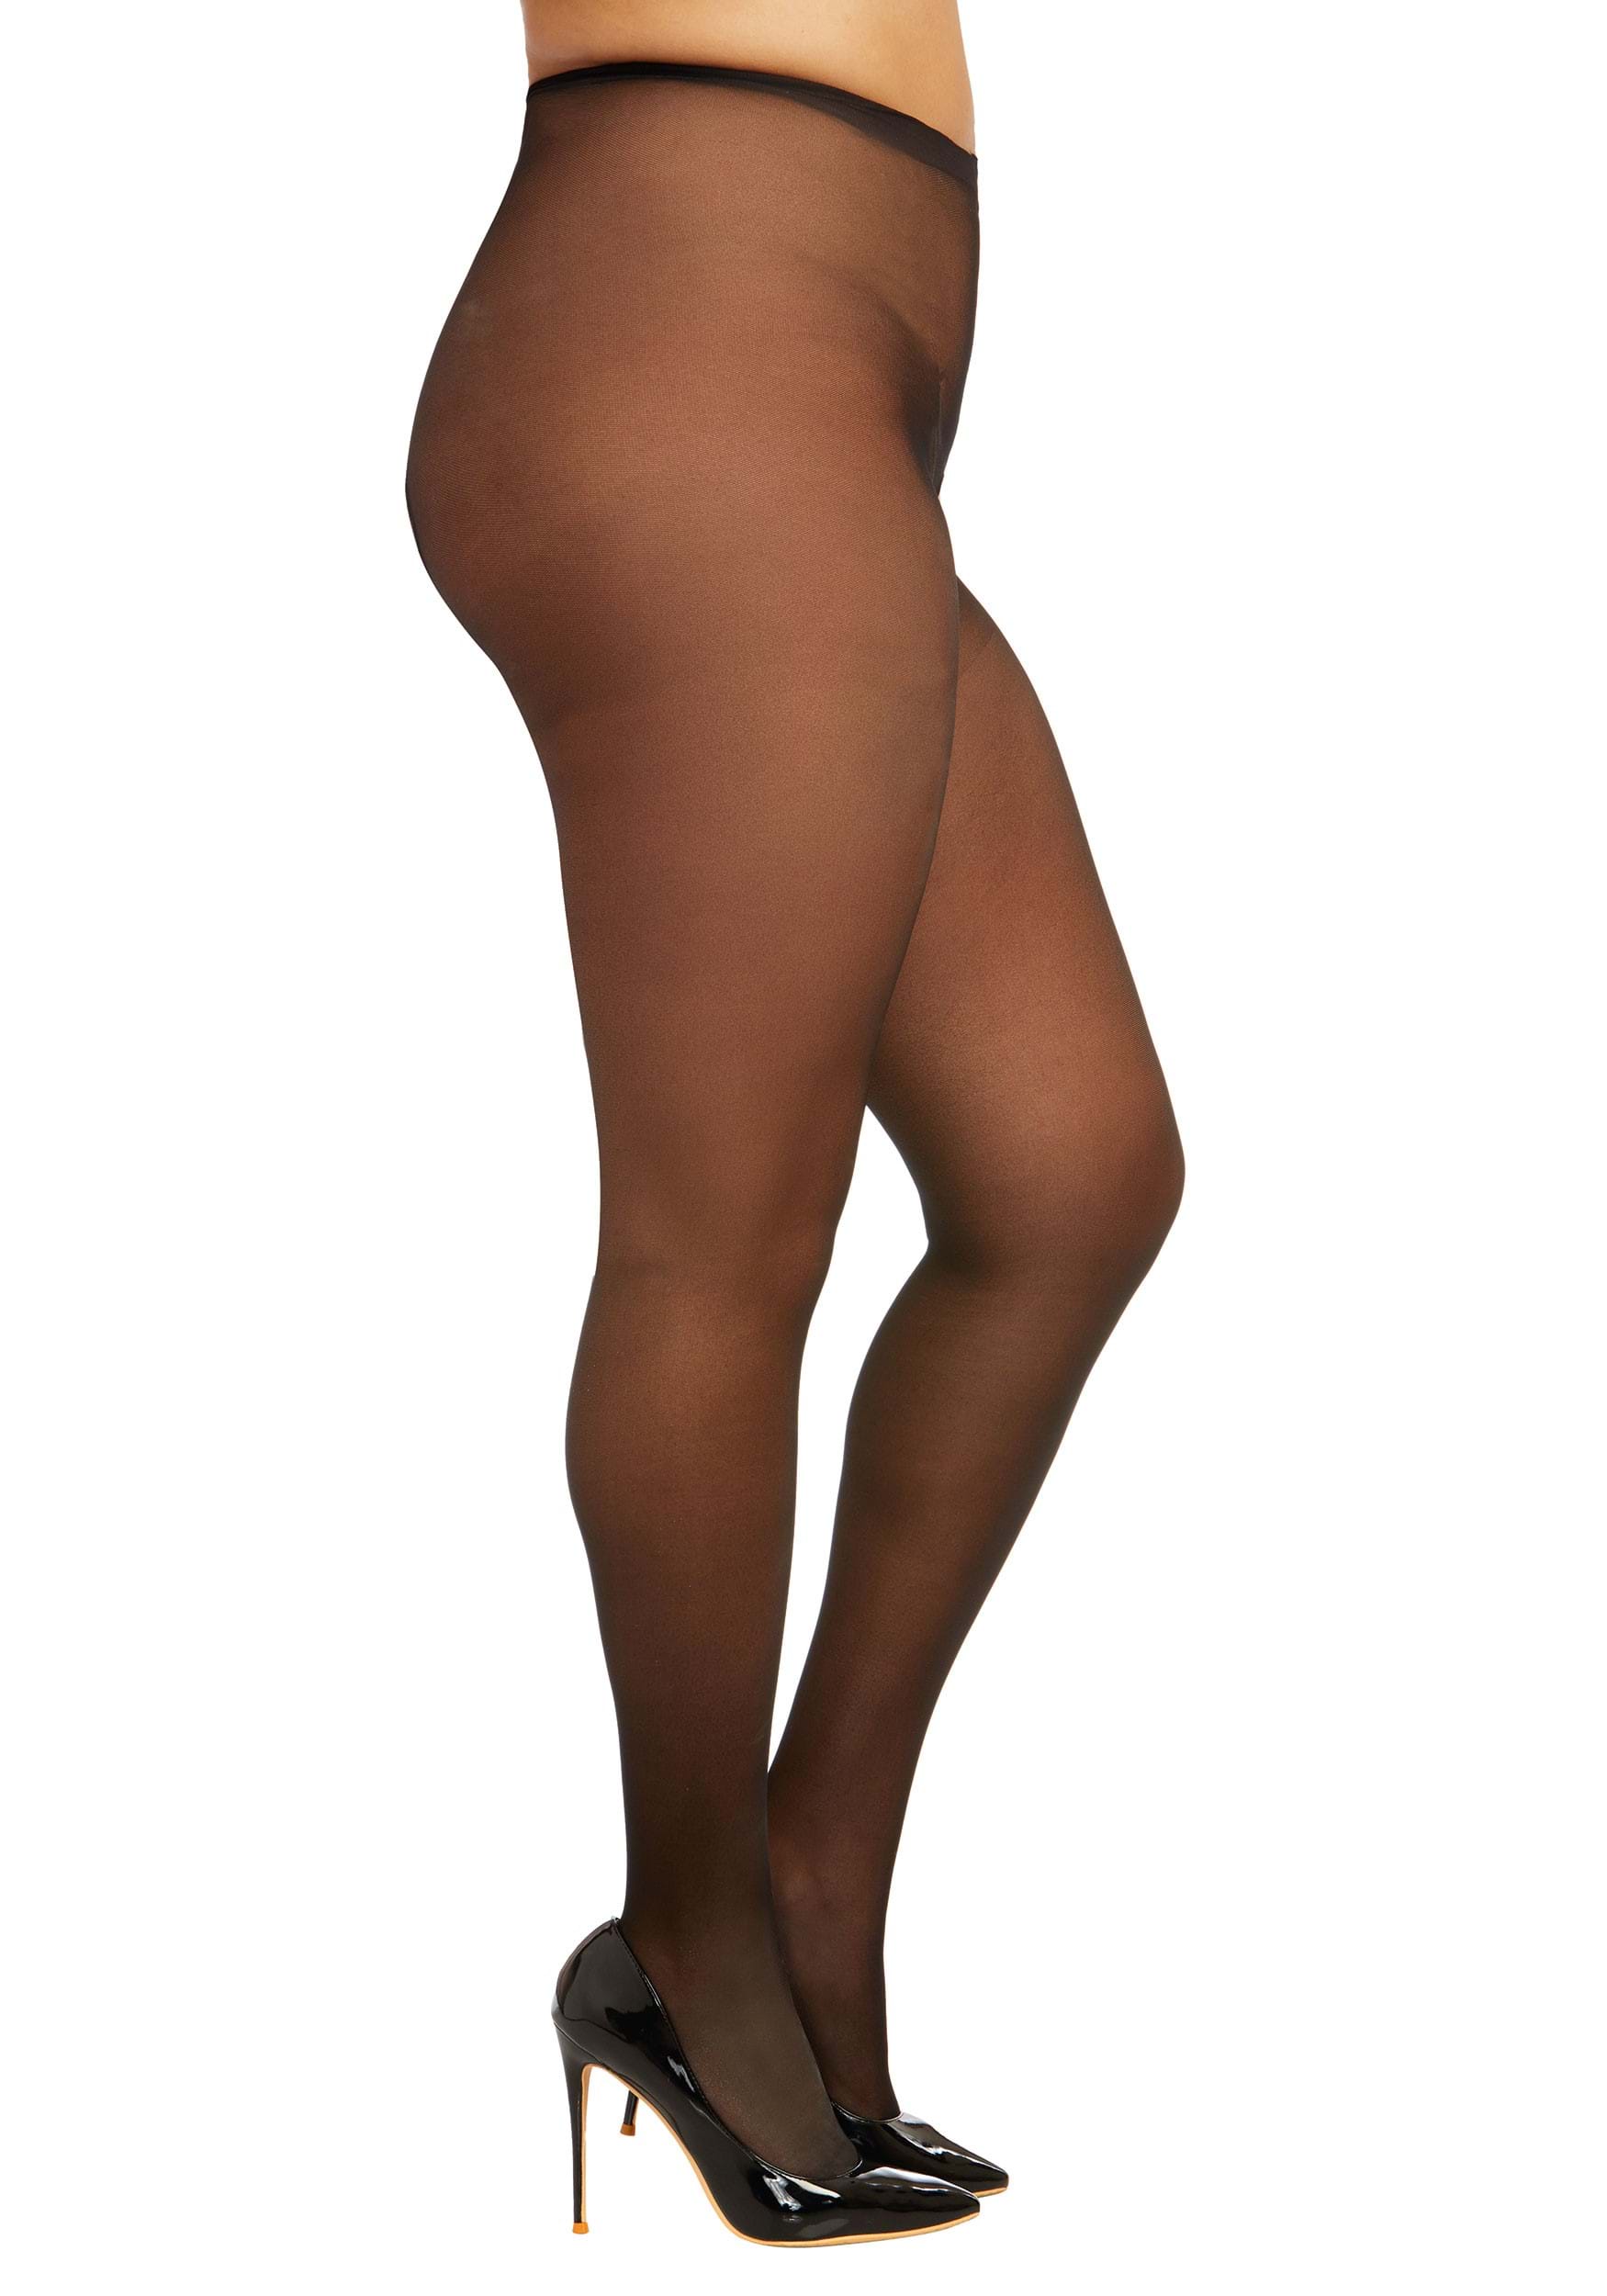 anil chand recommends black woman in pantyhose pic